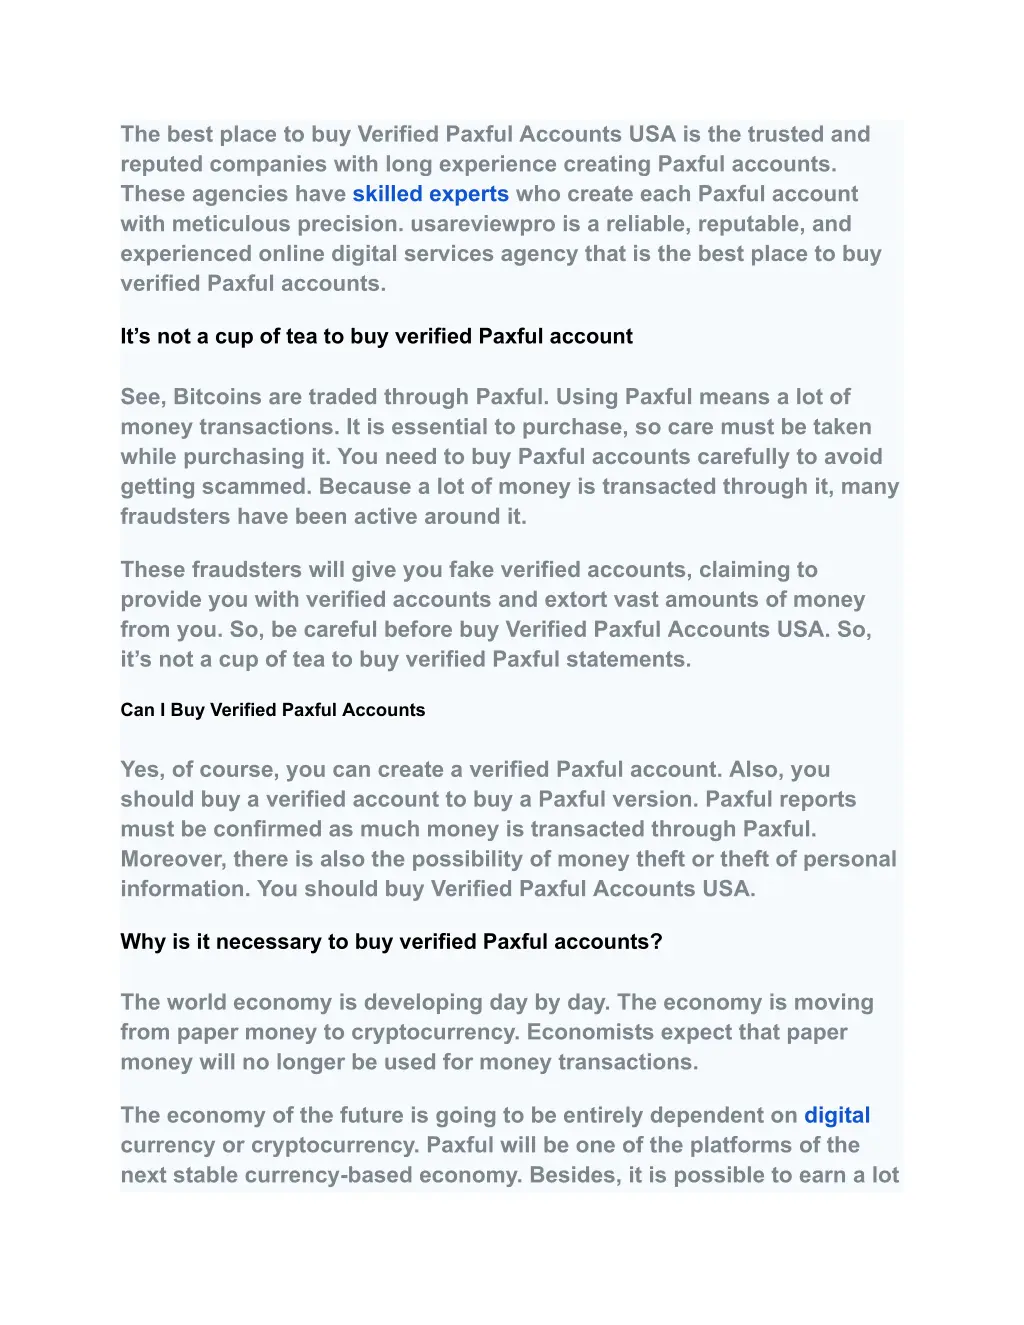 the best place to buy verified paxful accounts